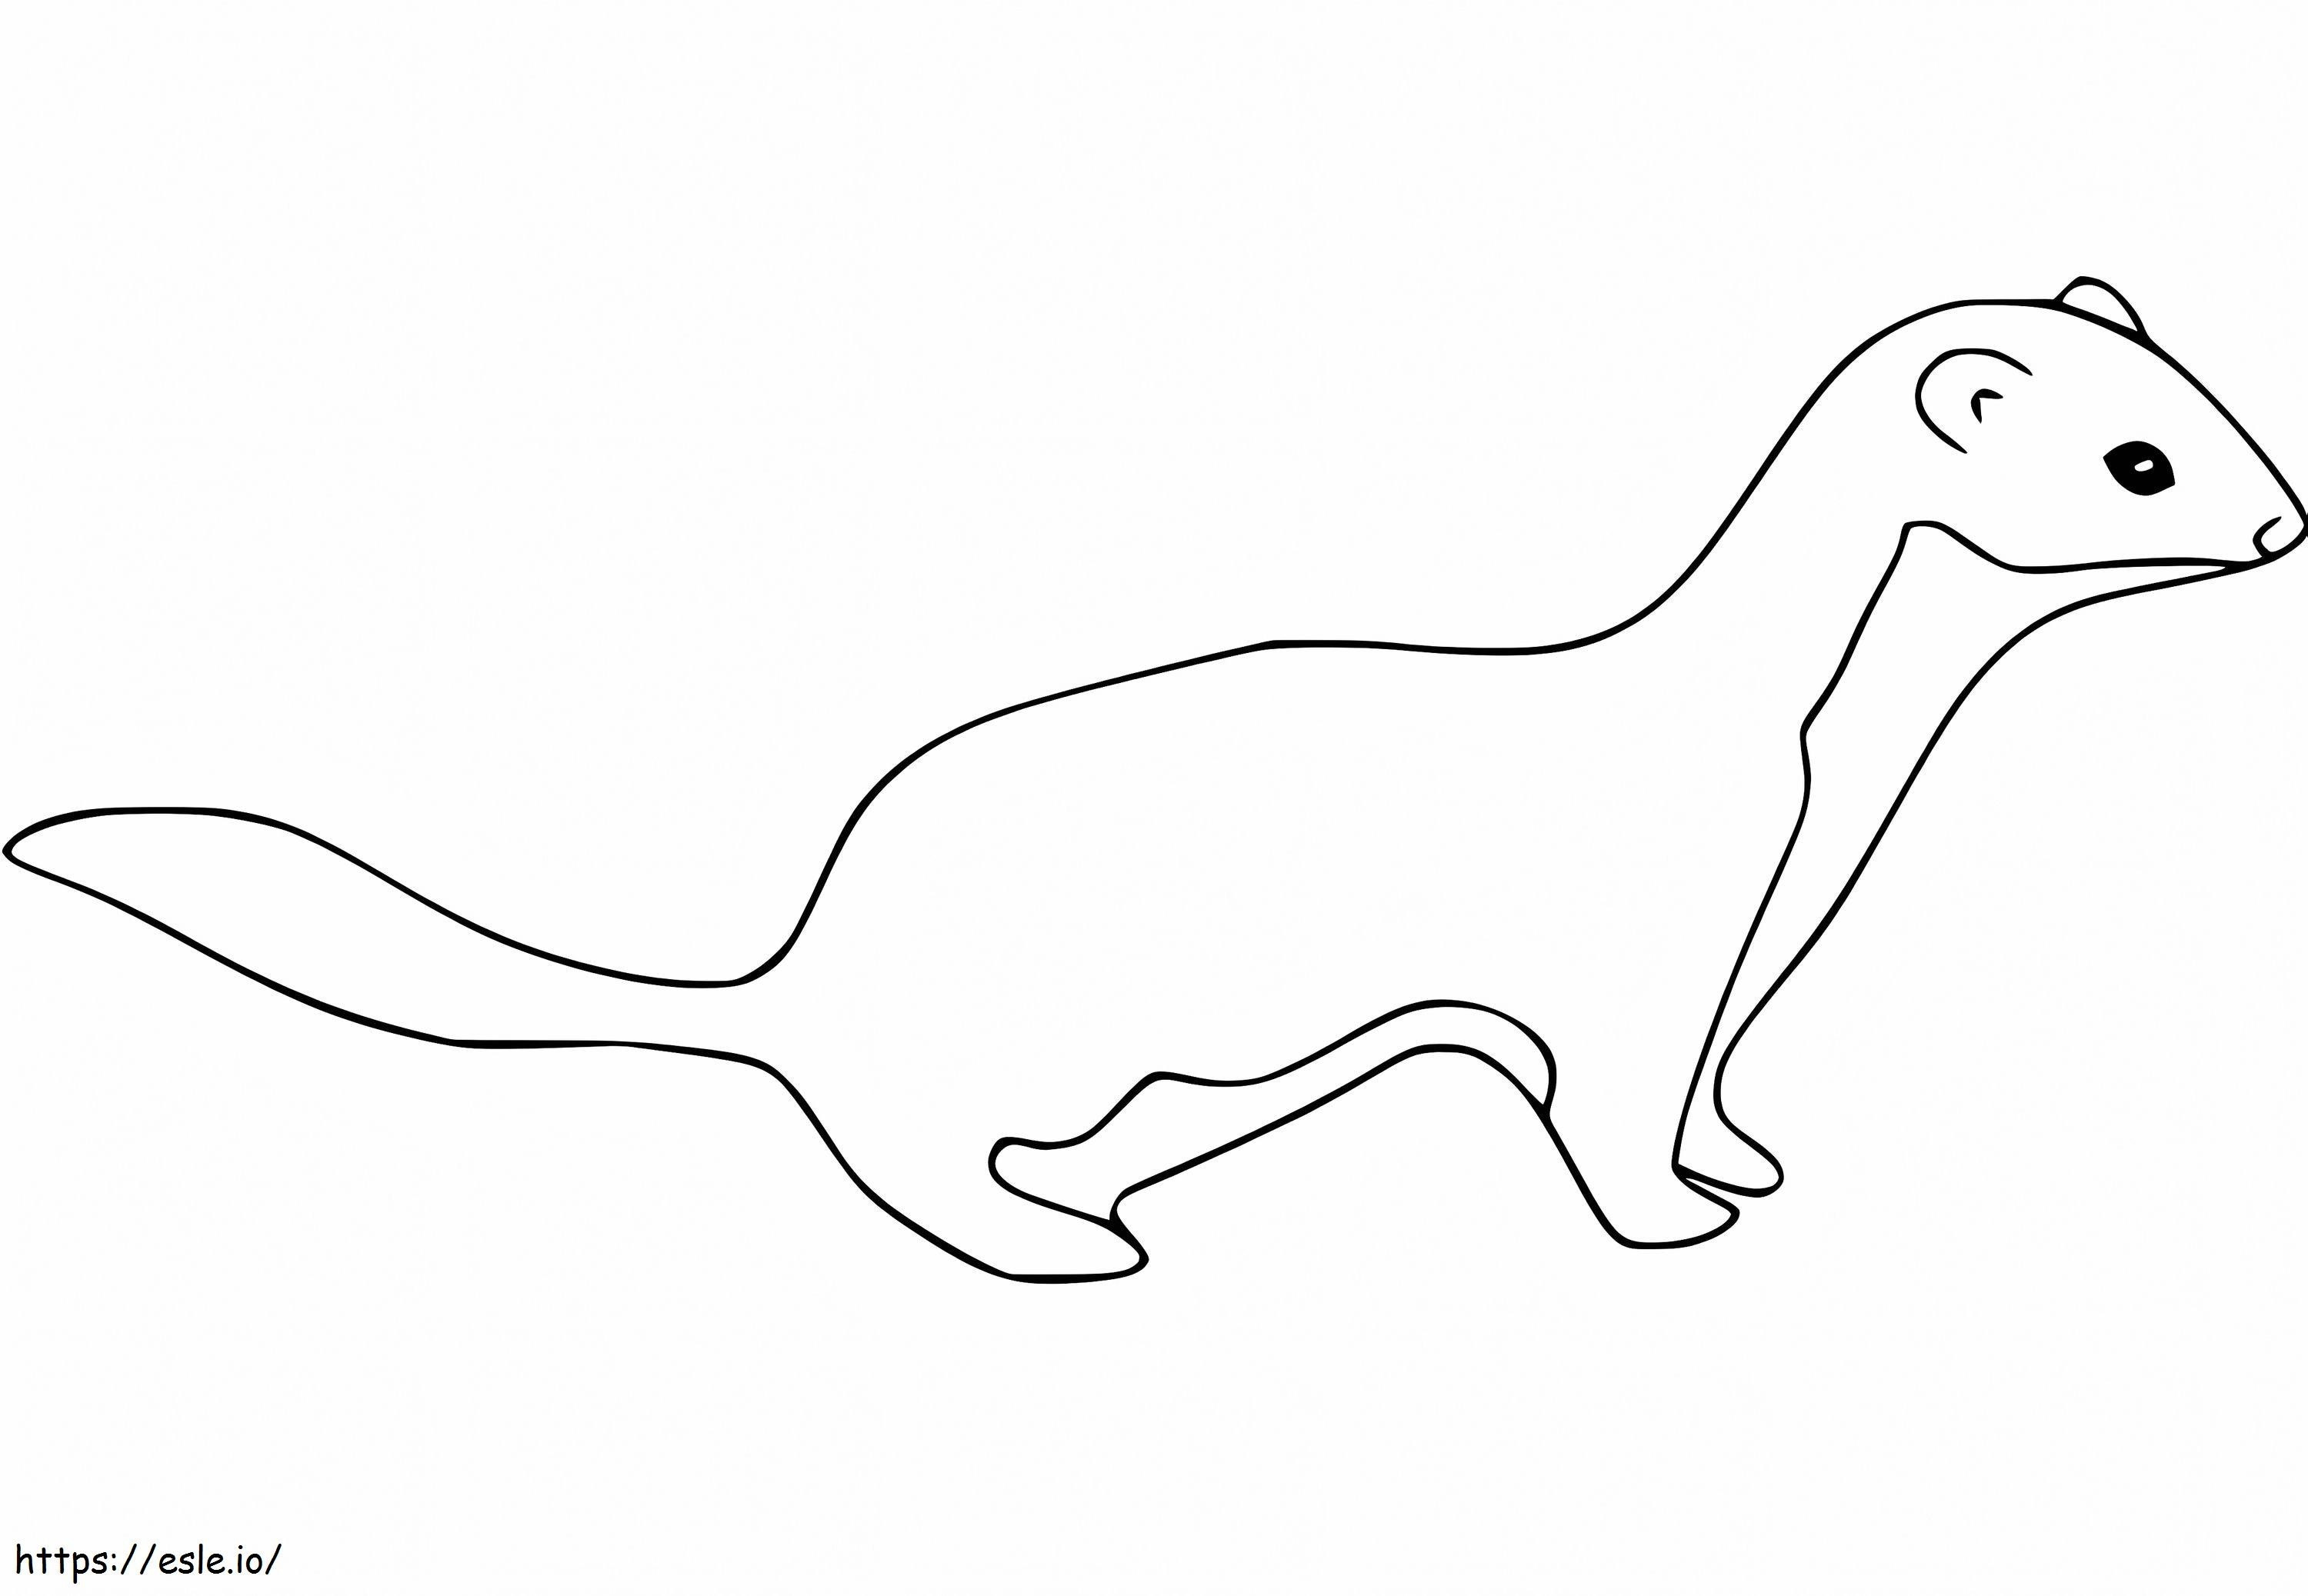 Little Weasel coloring page